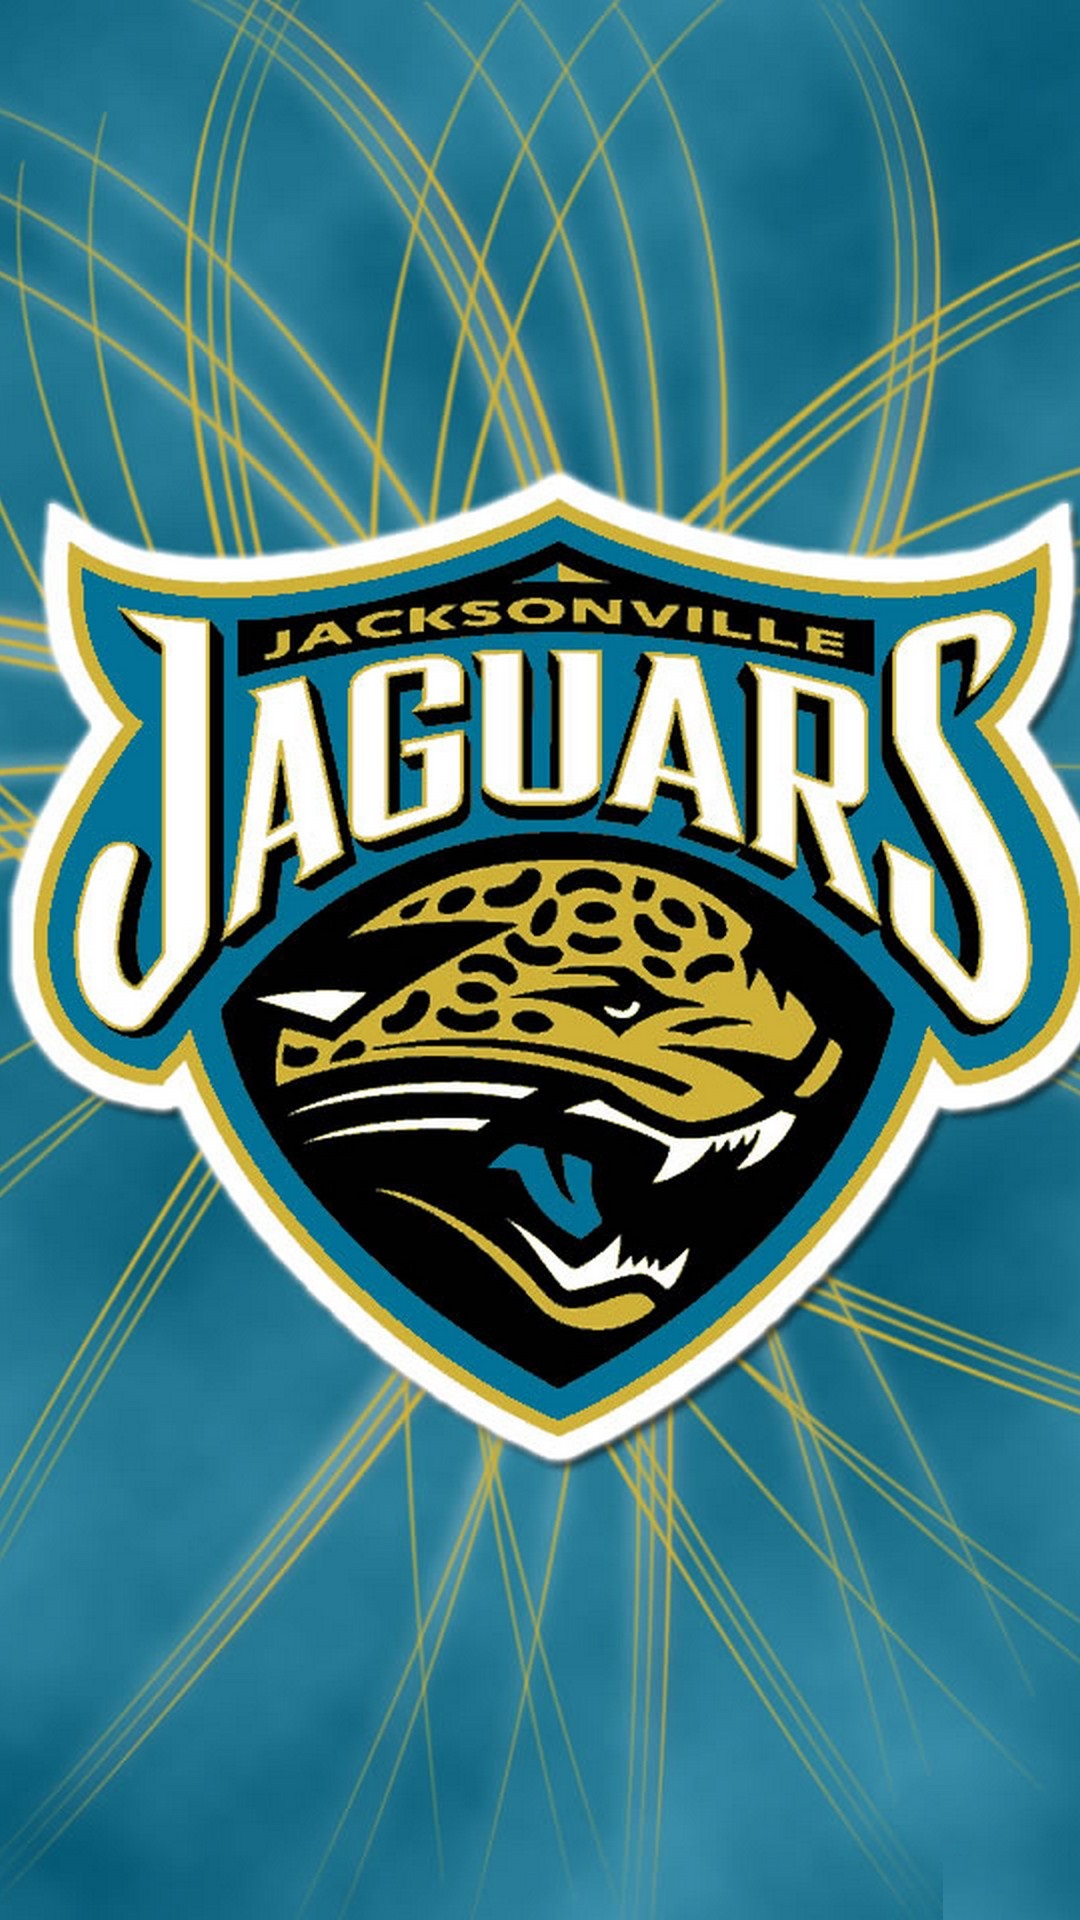 Jacksonville Jaguars iPhone Wallpaper HD with high-resolution 1080x1920 pixel. Download and set as wallpaper for Desktop Computer, Apple iPhone X, XS Max, XR, 8, 7, 6, SE, iPad, Android